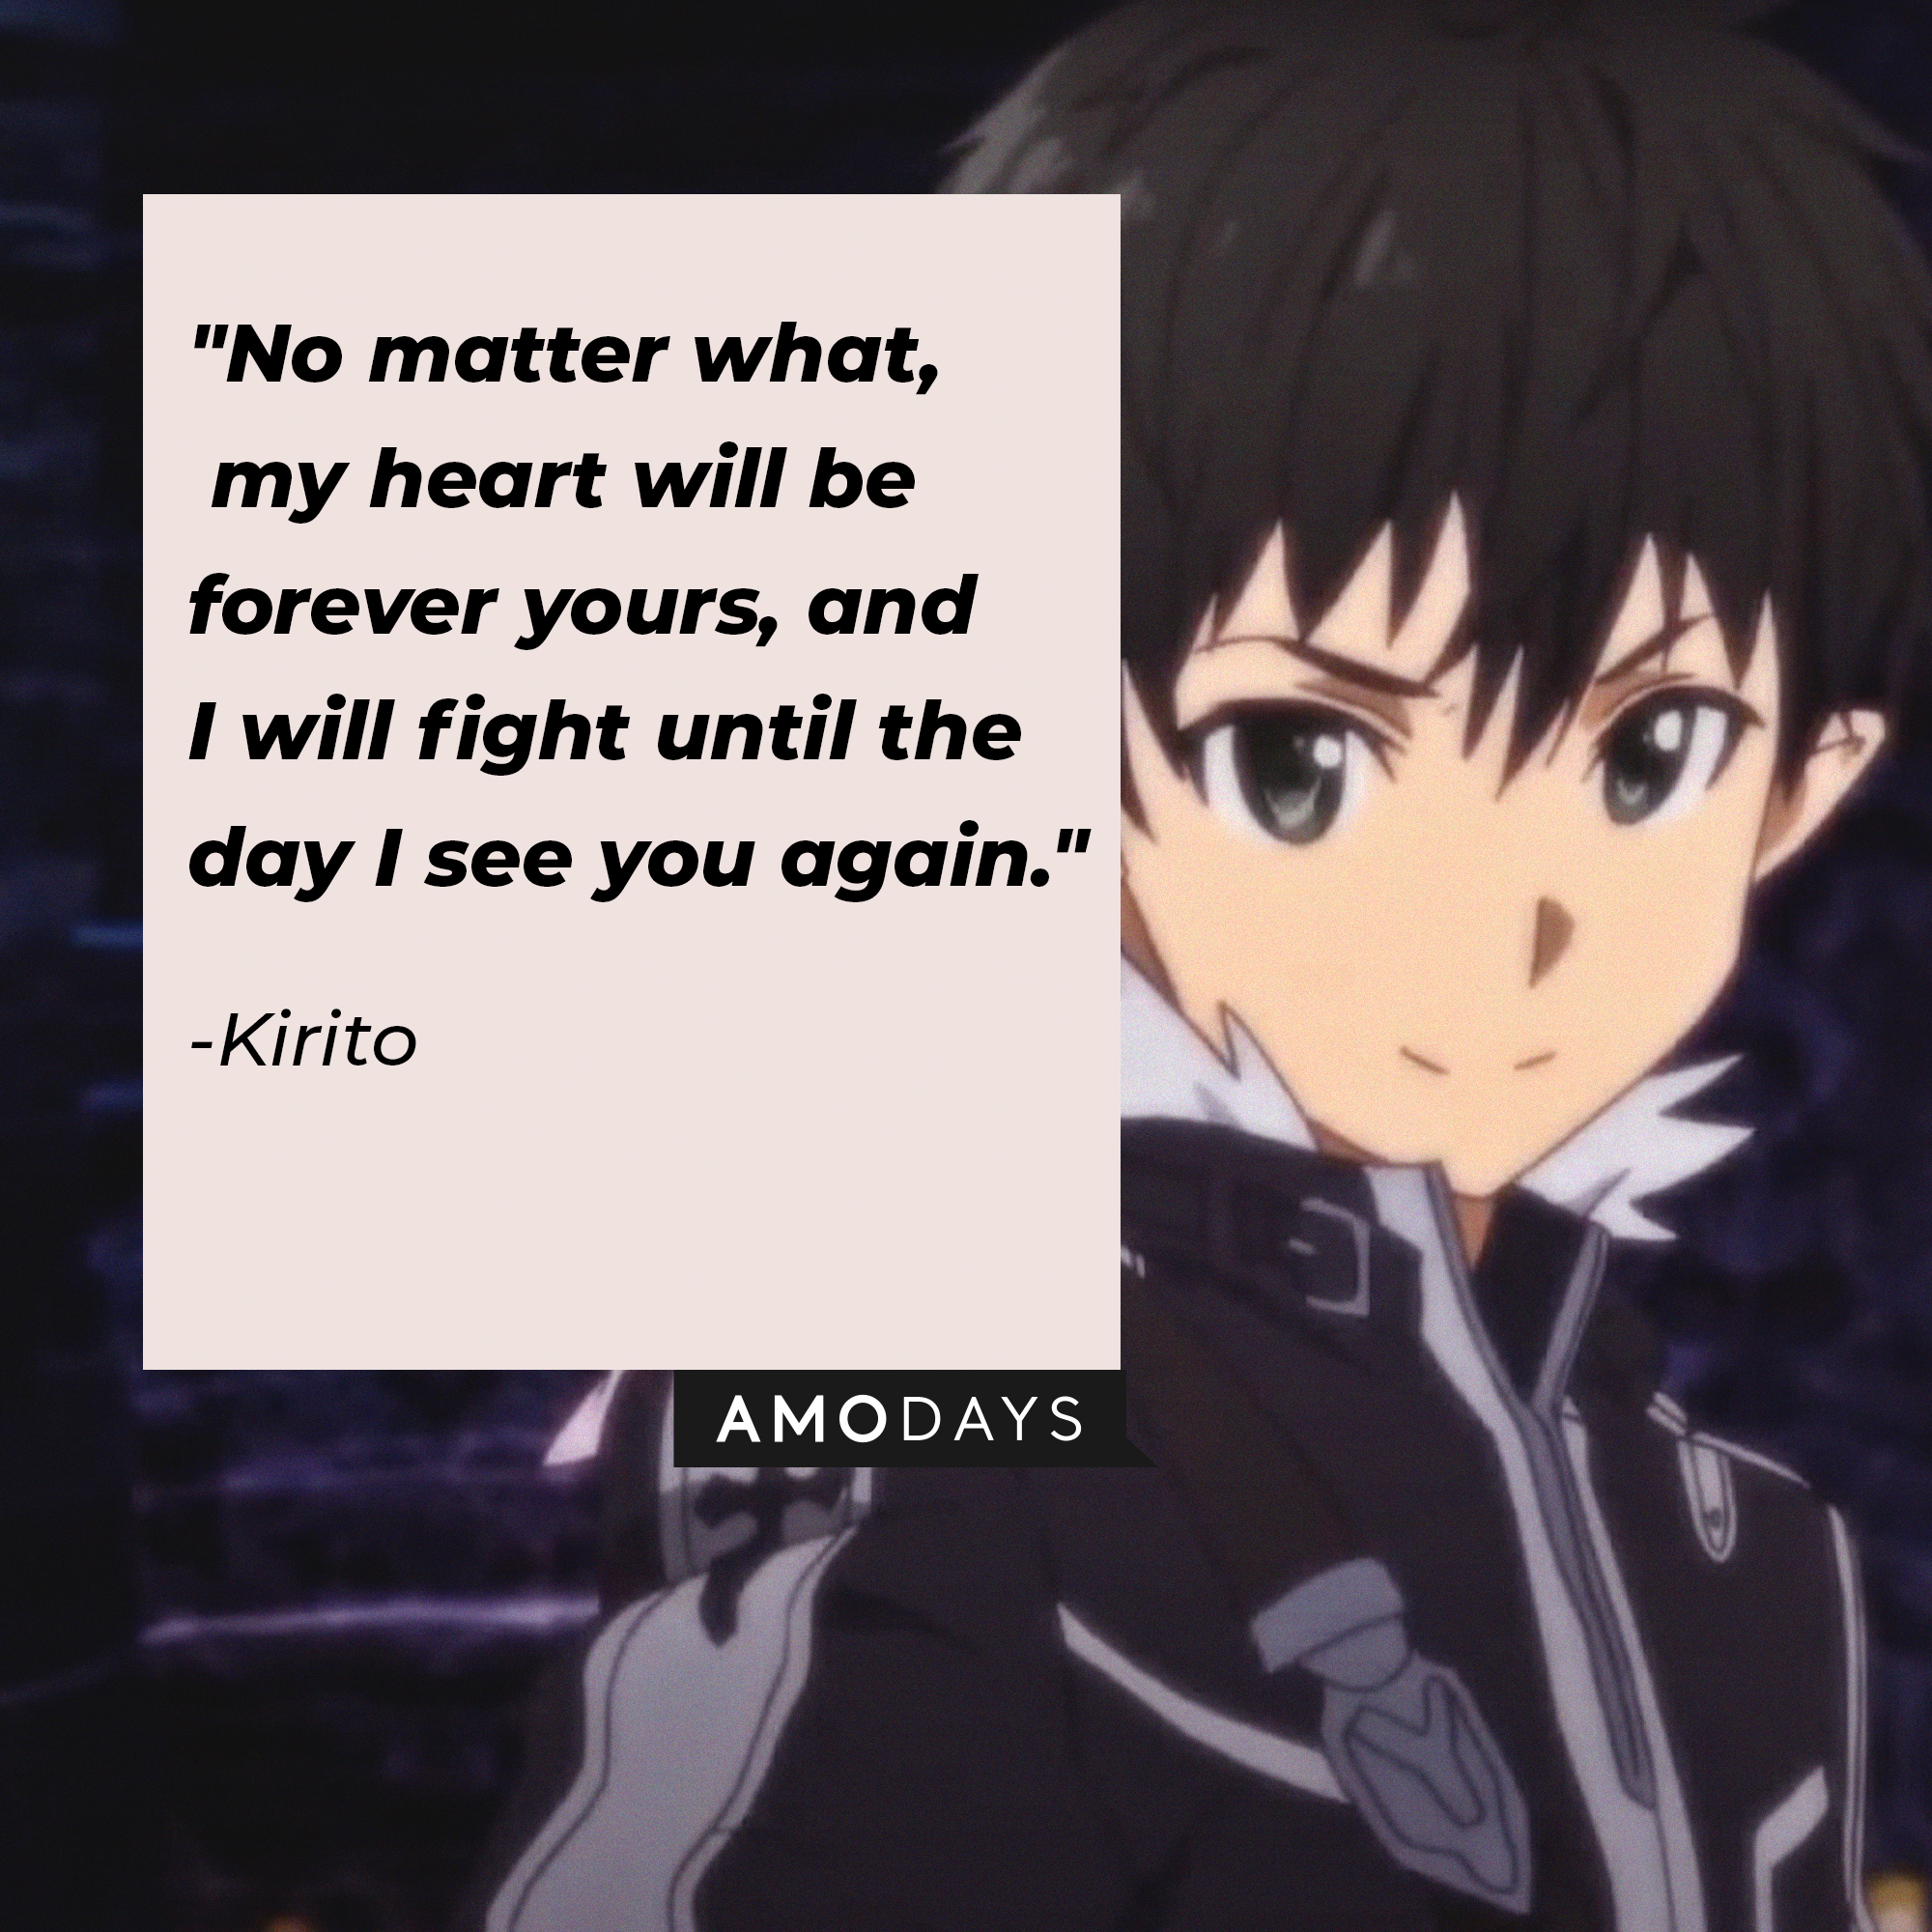 Kirito's quote: "No matter what, my heart will be forever yours, and I will fight until the day I see you again." | Source: Facebook.com/SwordArtOnlineUSA